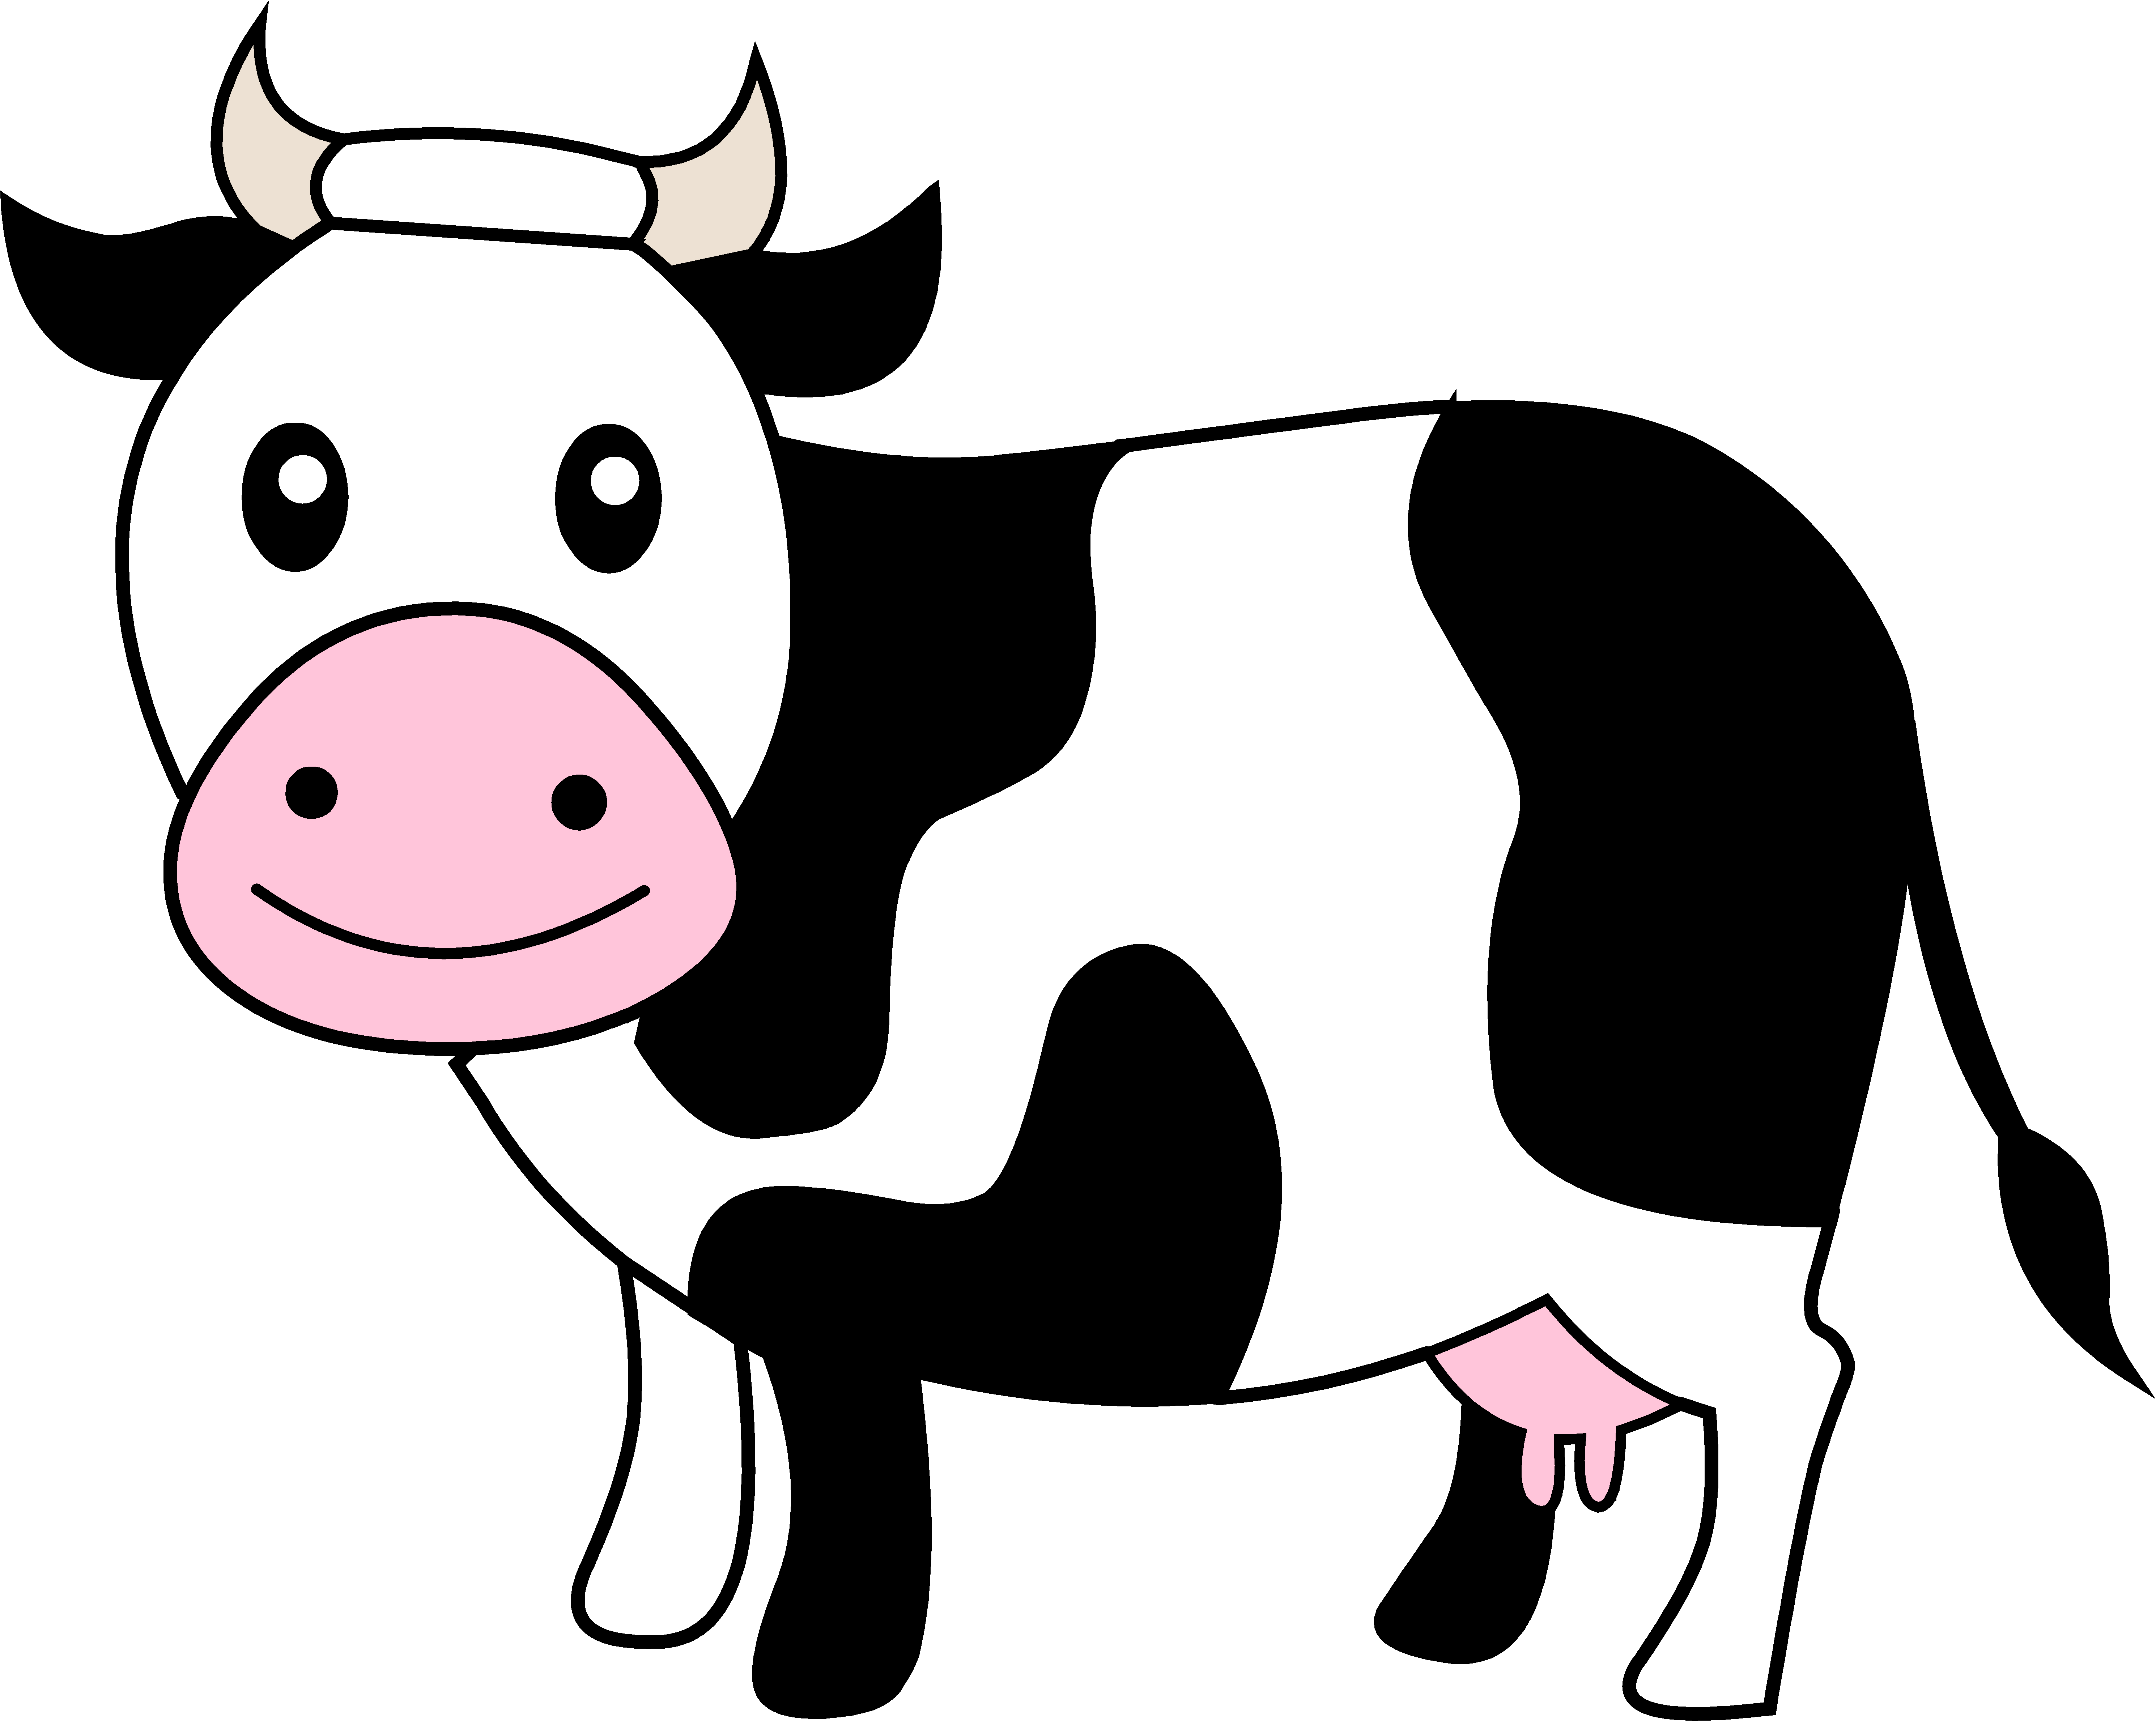 Clipart food cow. Clip art embroidery needle